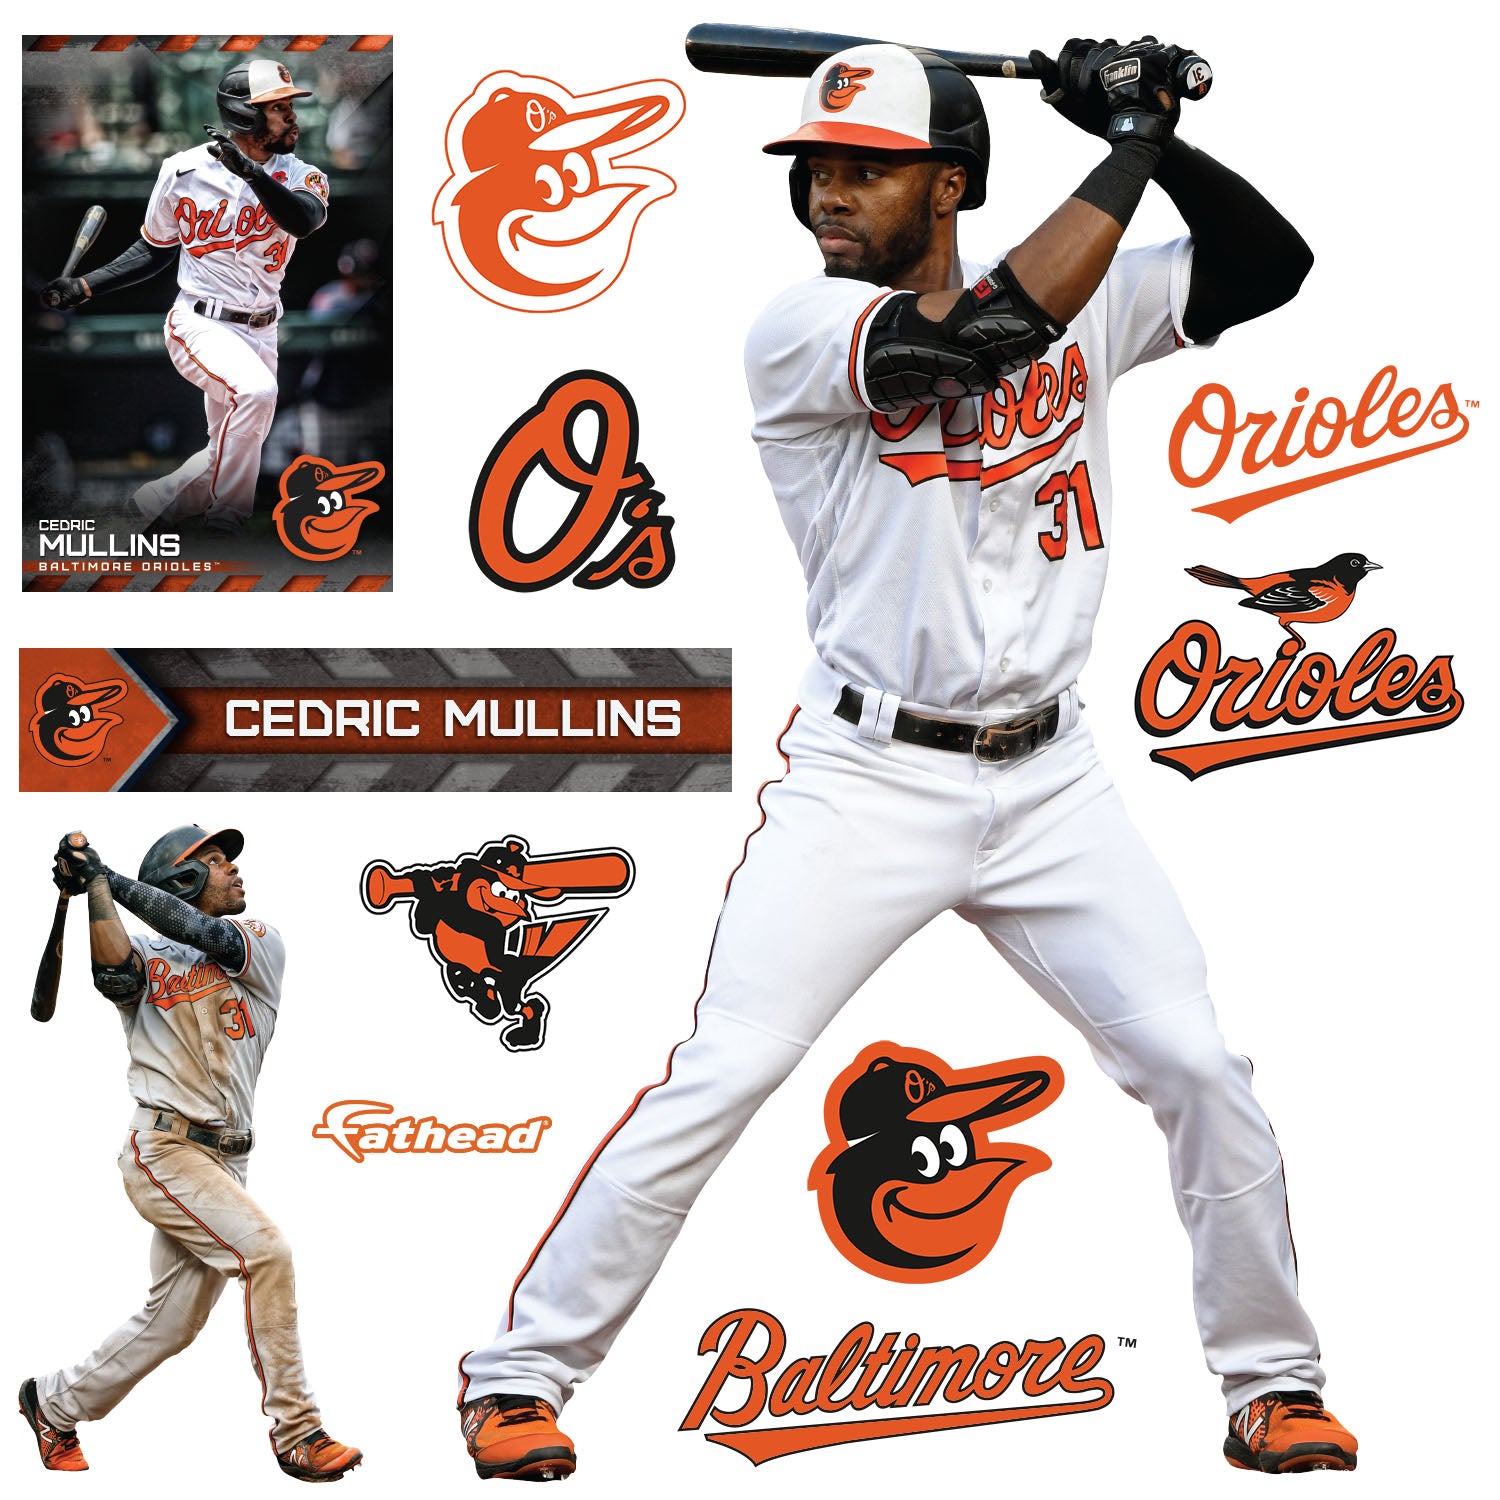 2022 Opening Day Base #201 Cedric Mullins - Baltimore Orioles